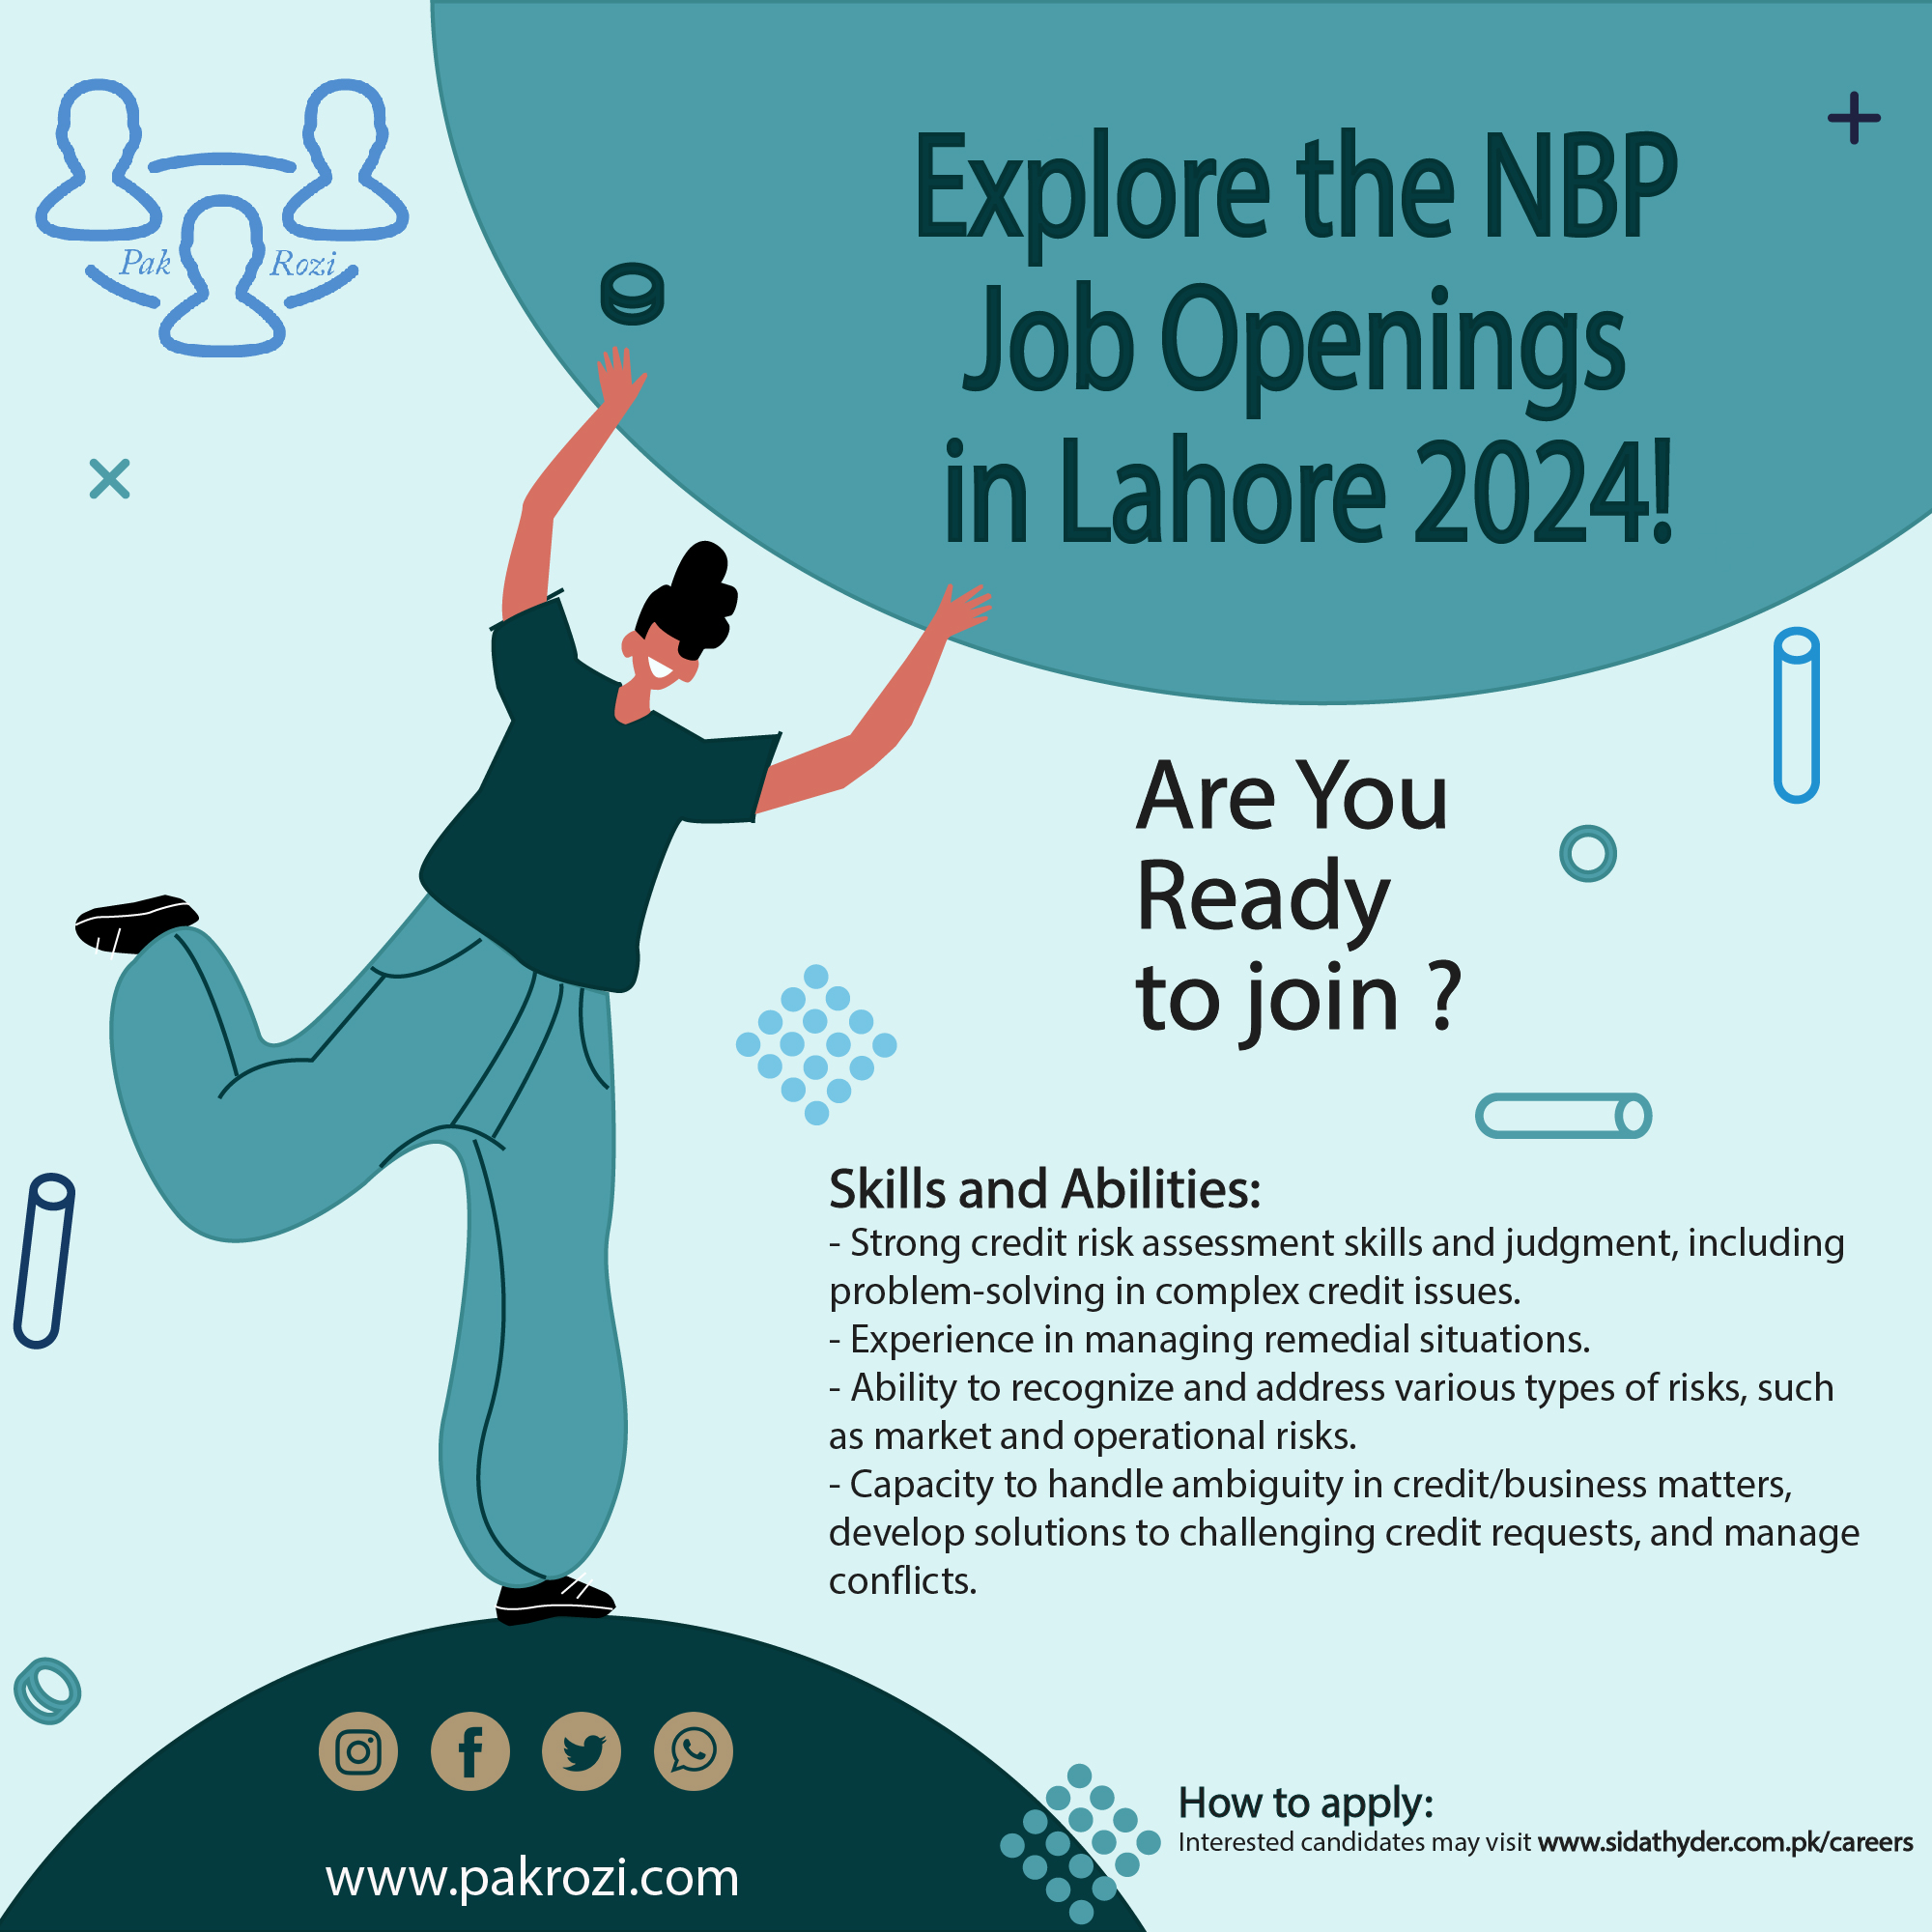 Explore the Latest NBP Job Openings in Lahore